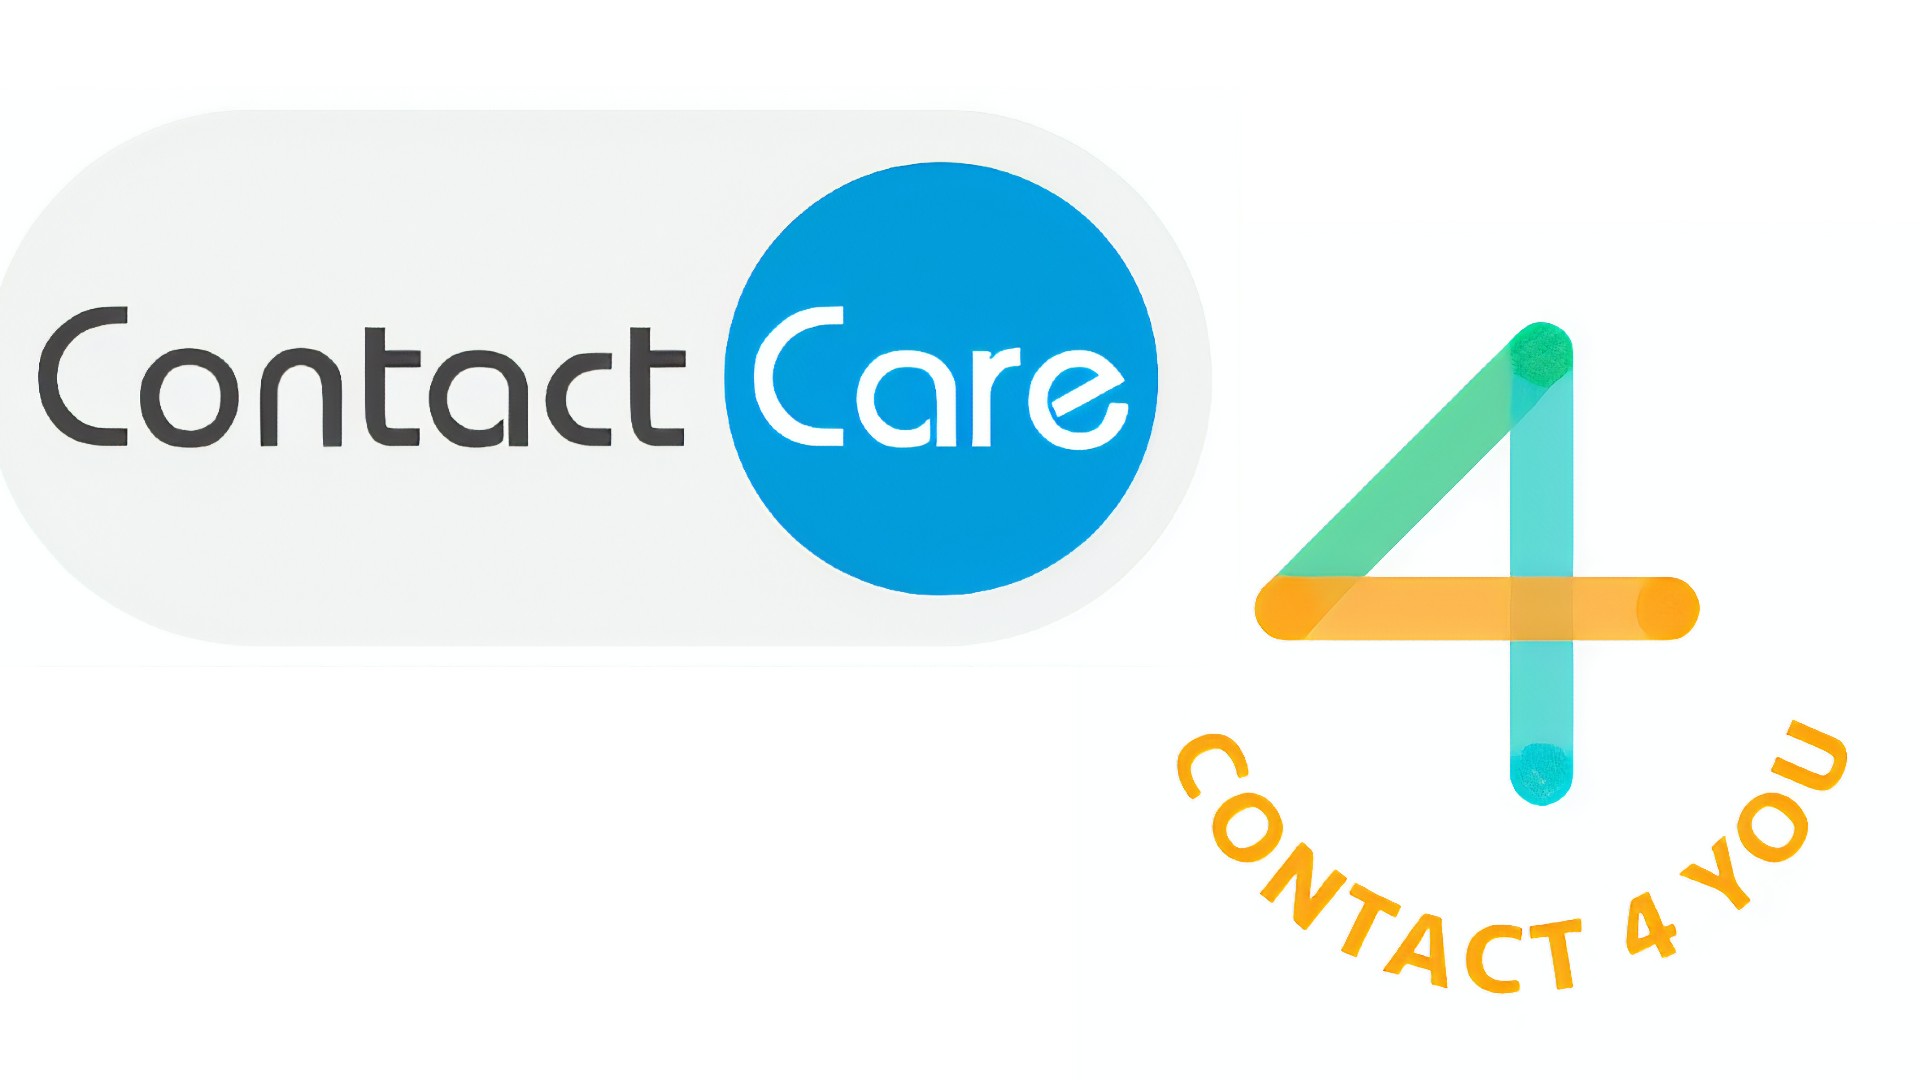 ContactCare neemt Contact4You over